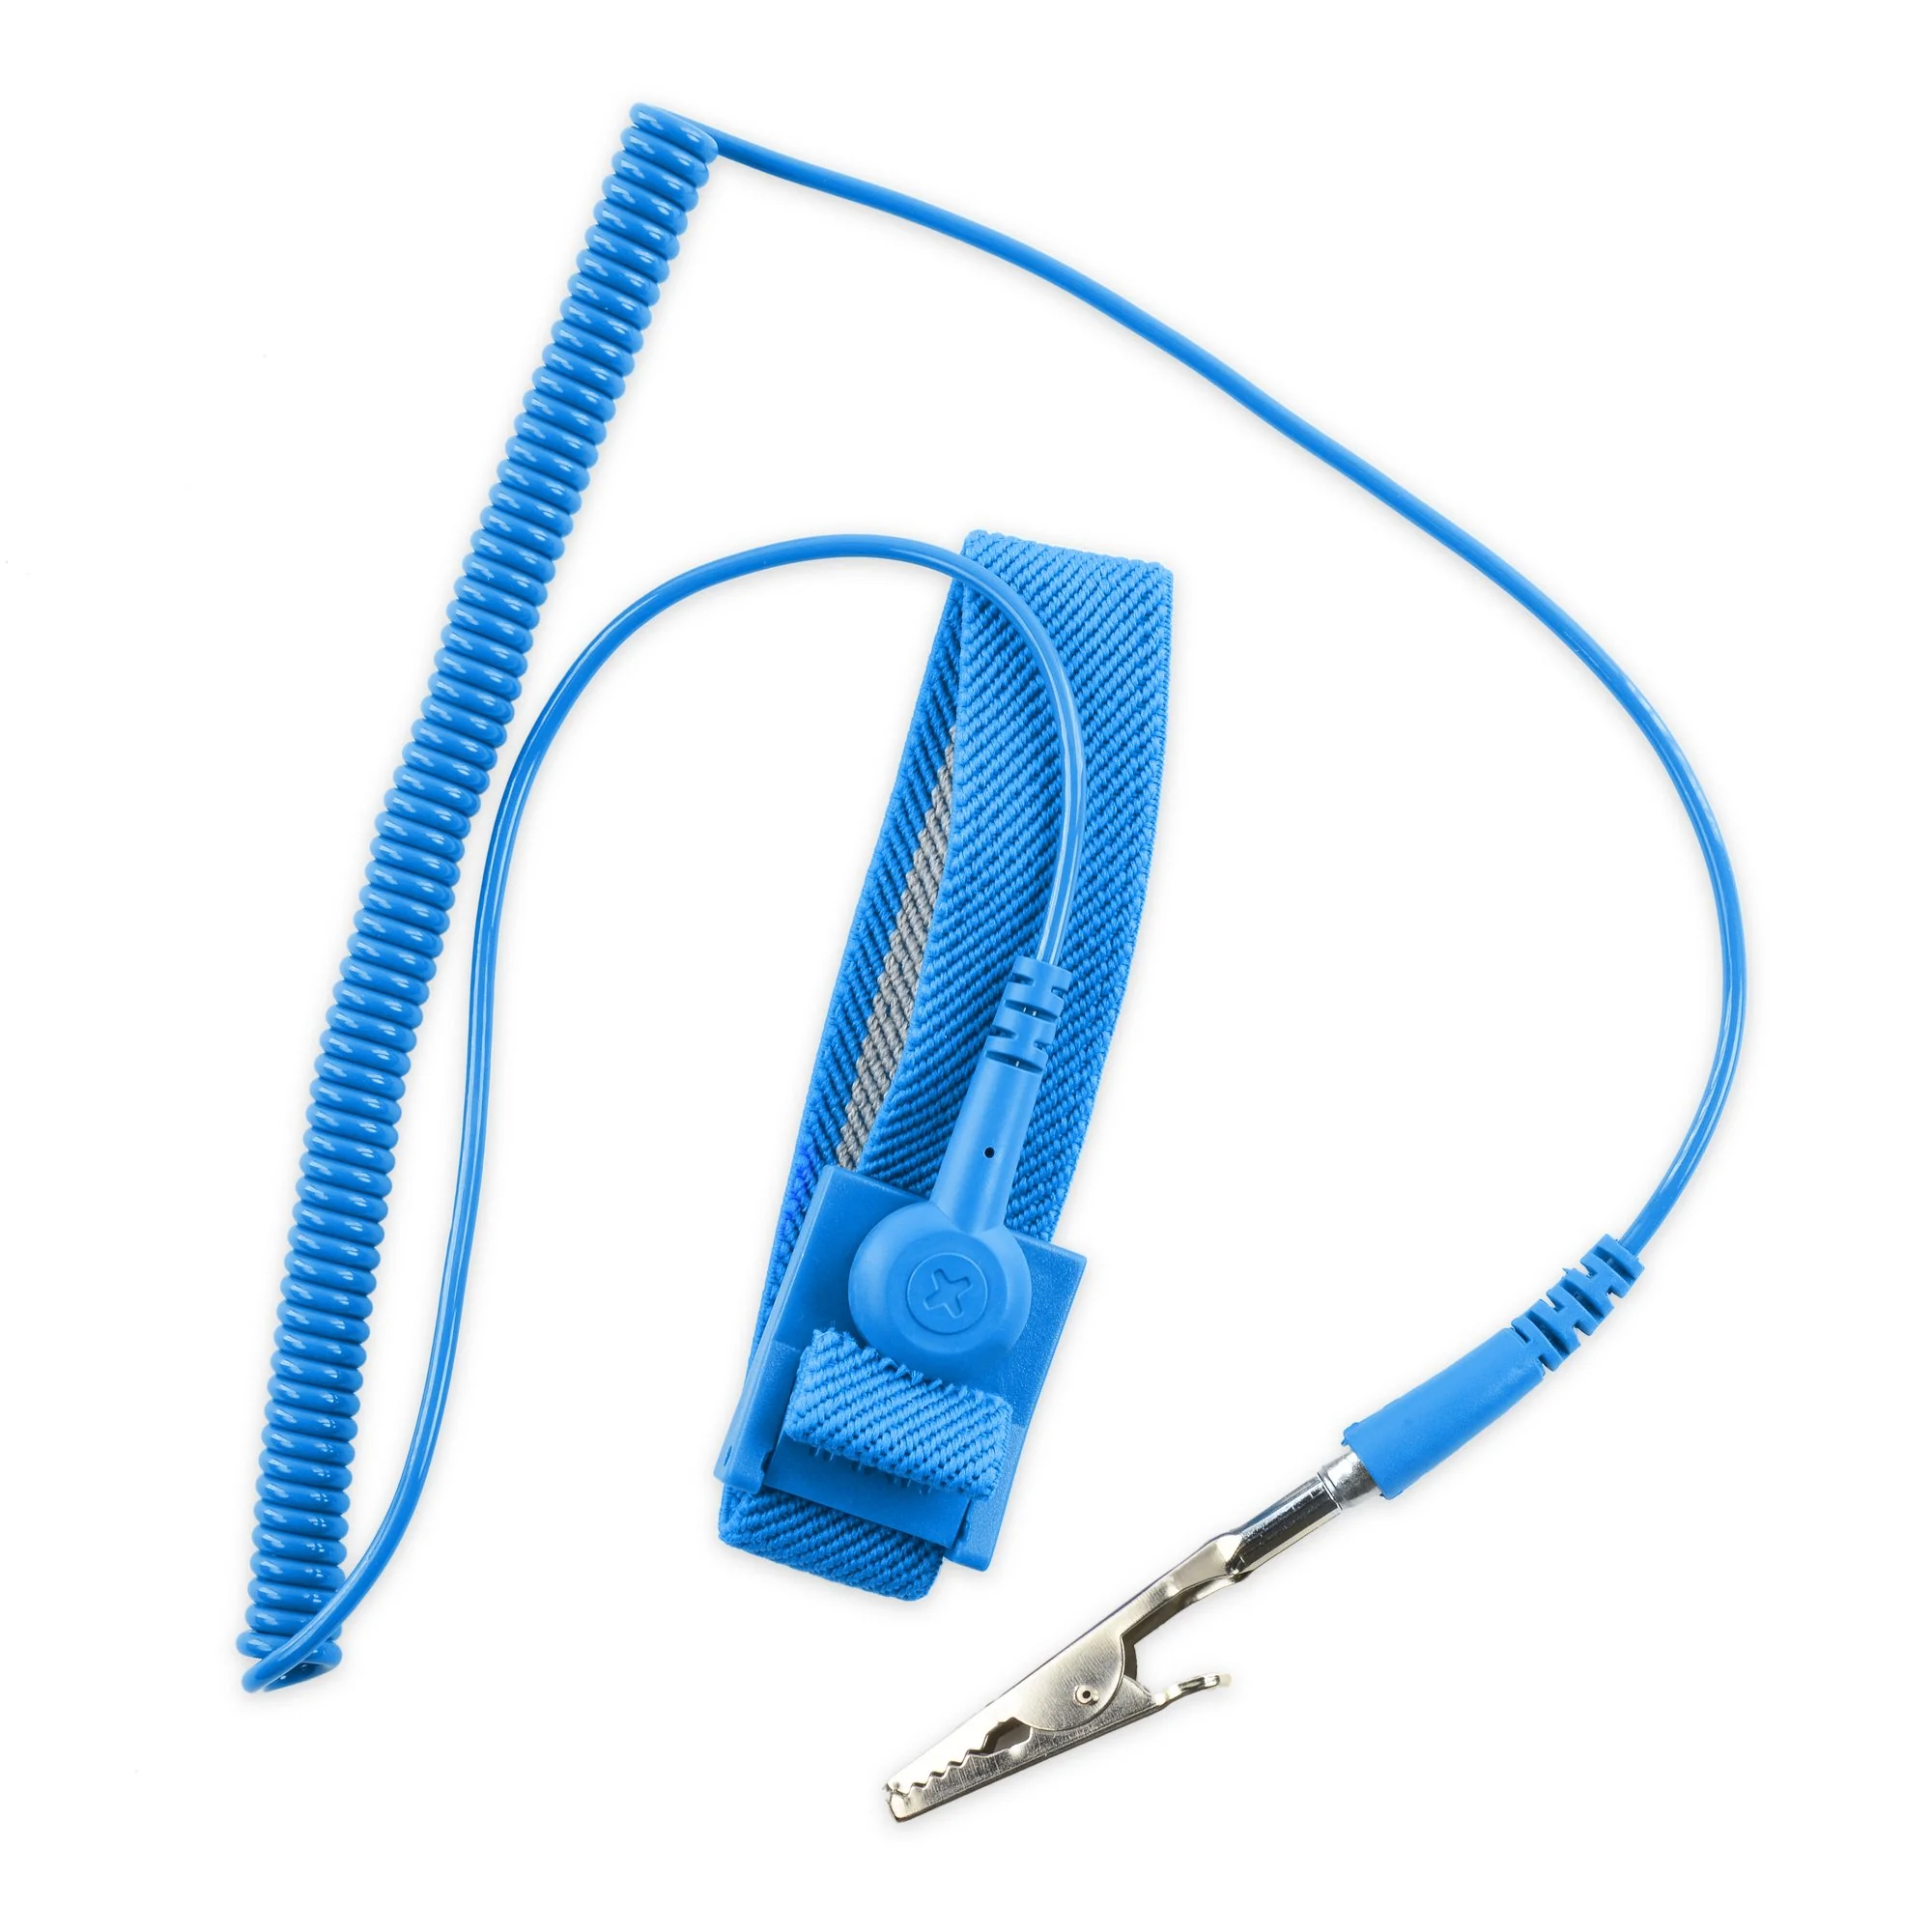 StaticShield Anti-Static Wrist Strap - Protect Your PC Components During Maintenance